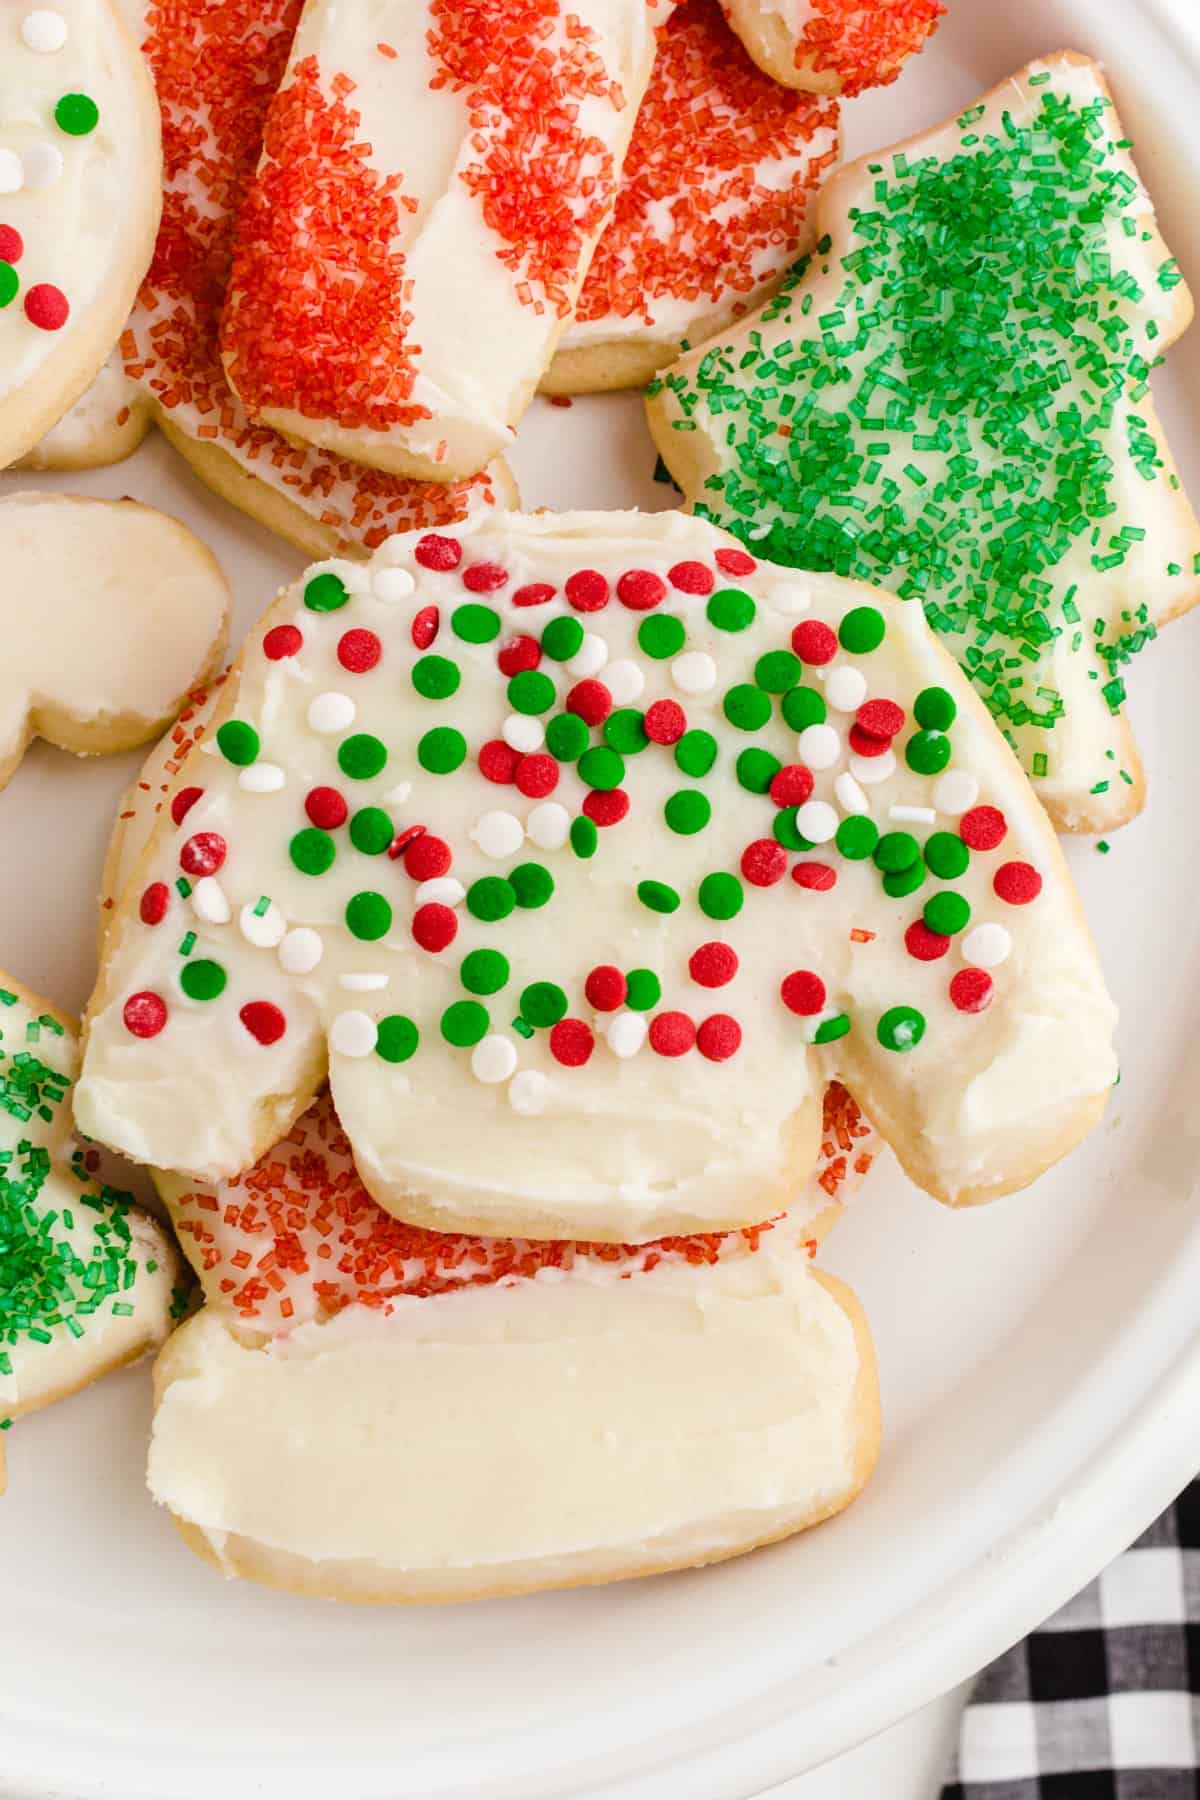 The Best Christmas Sugar Cookie Recipe (With Homemade Icing)